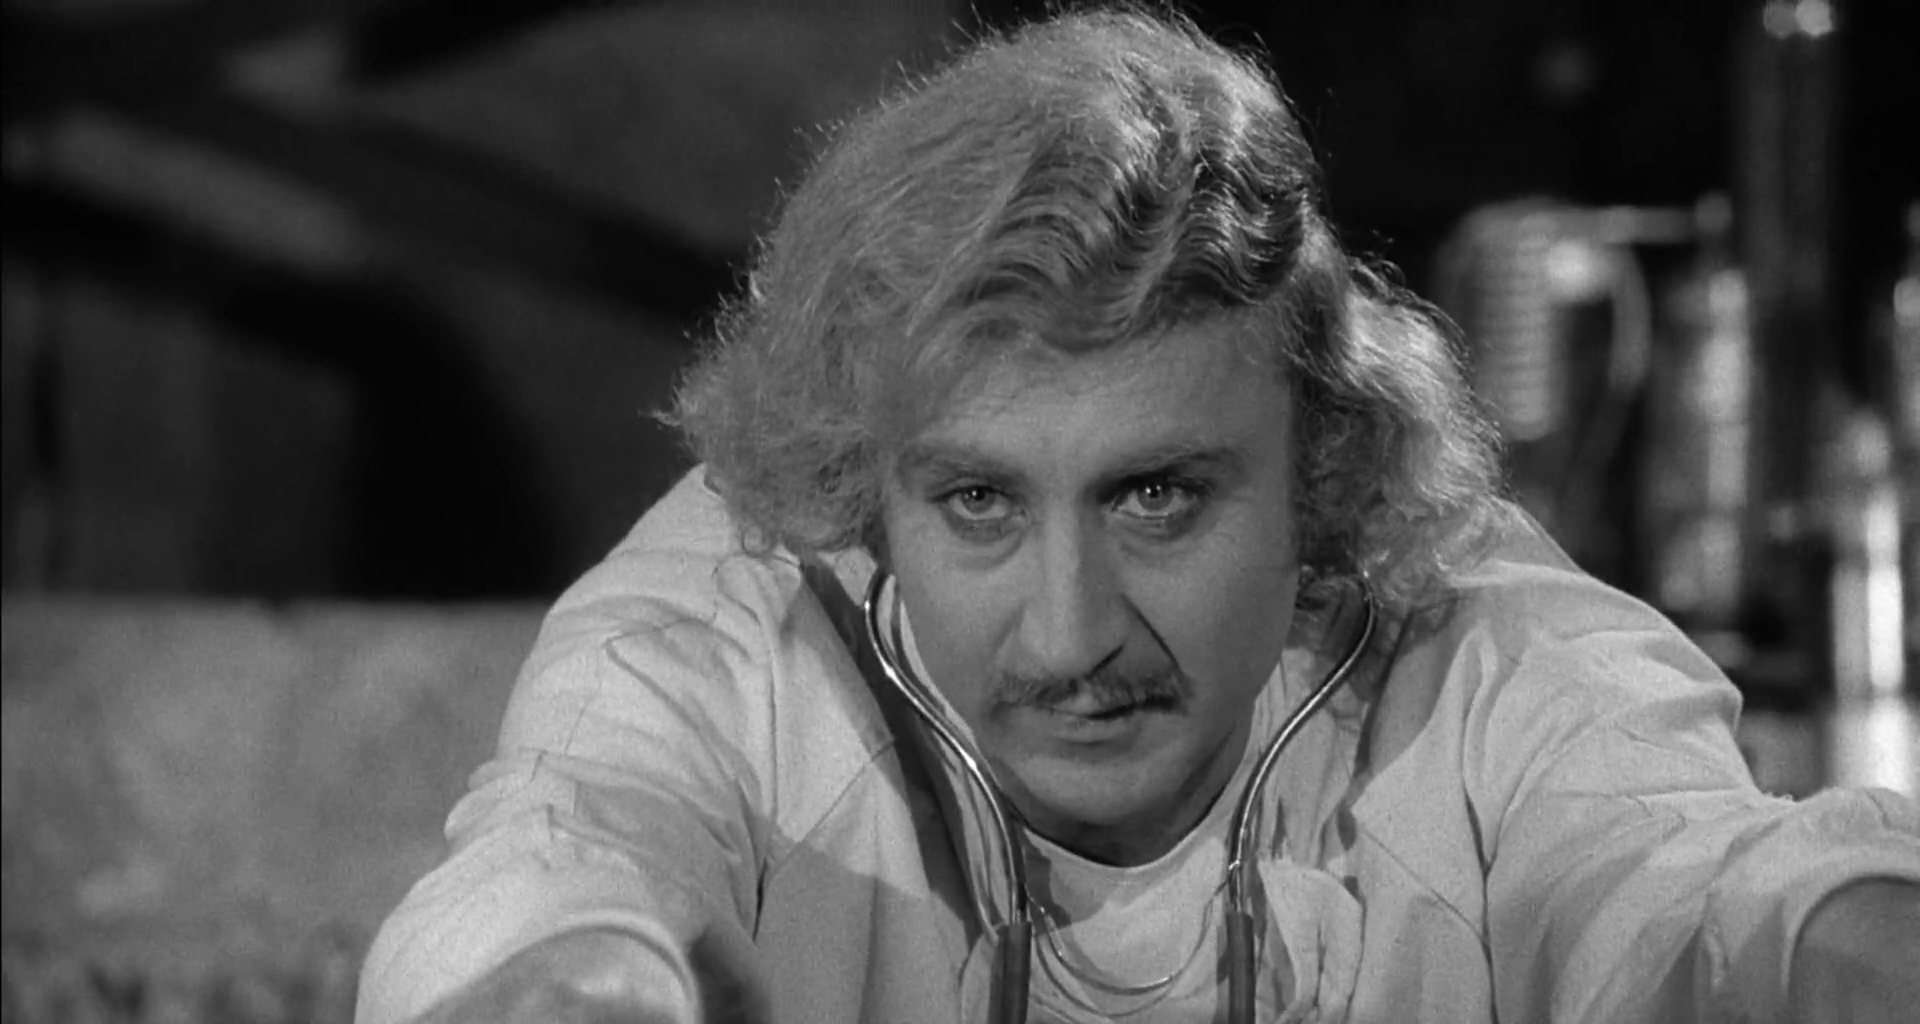 http://filmfanatic.org/wp-content/uploads/2012/11/Young-Frankenstein-Wilder.png